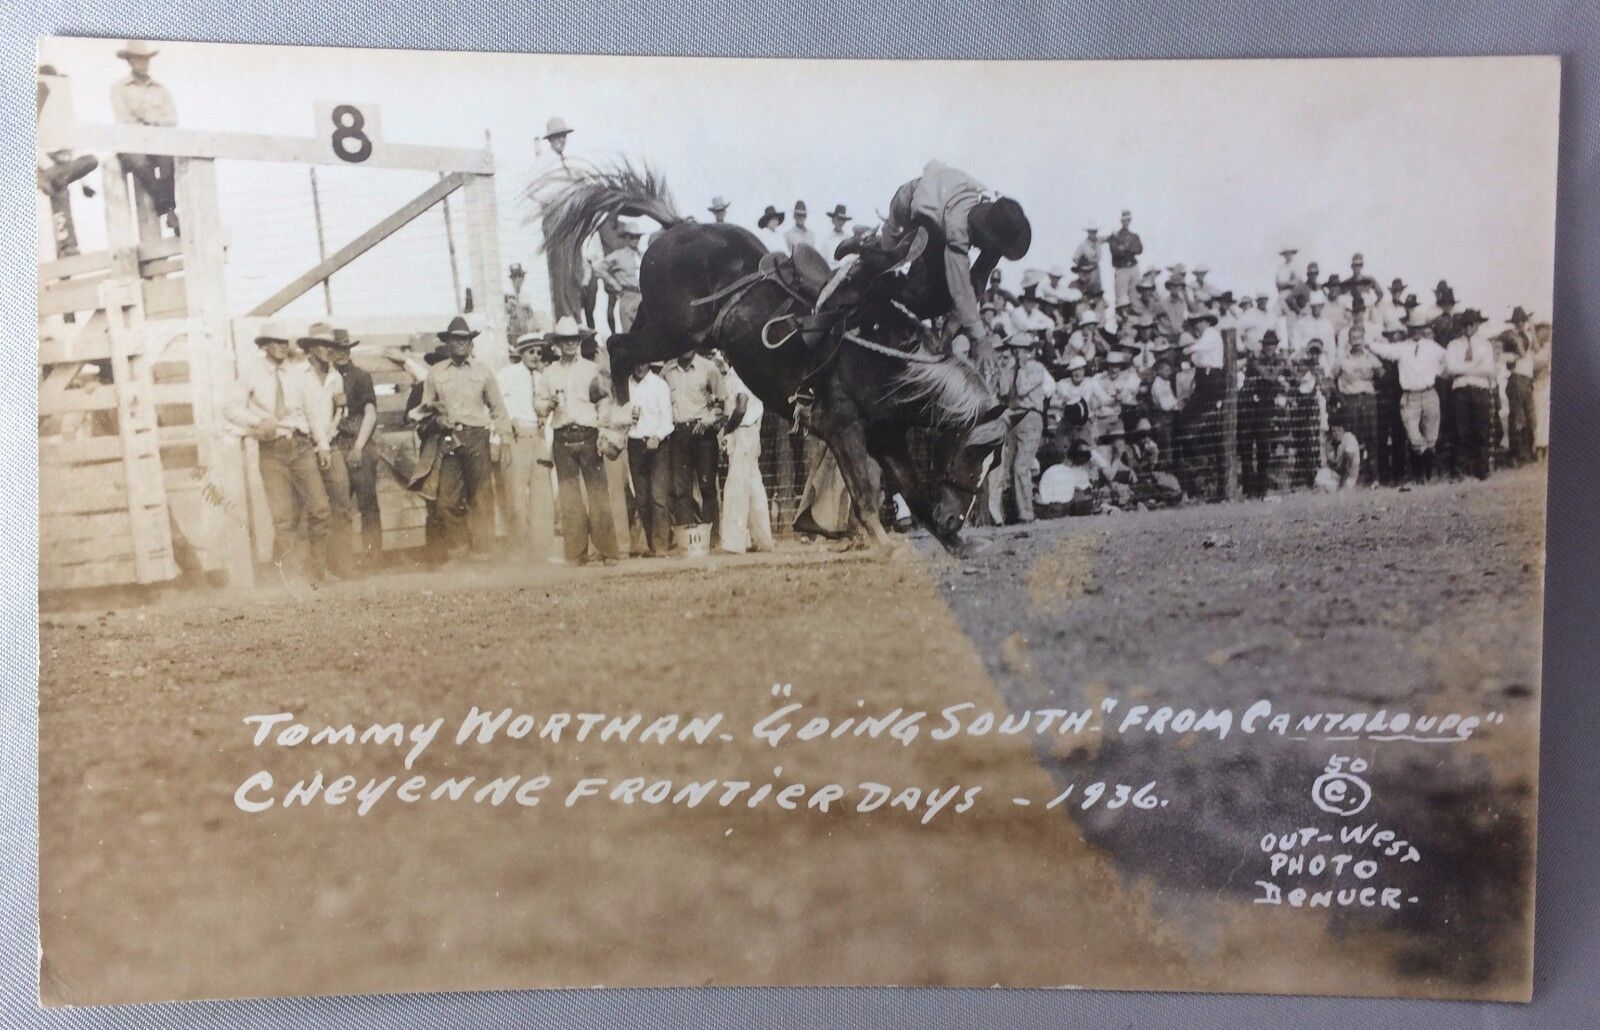 1936 RODEO Worthan BRONCO RPPC Real Photo POSTCARD Cowboy CHEYENNE Frontier DAYS